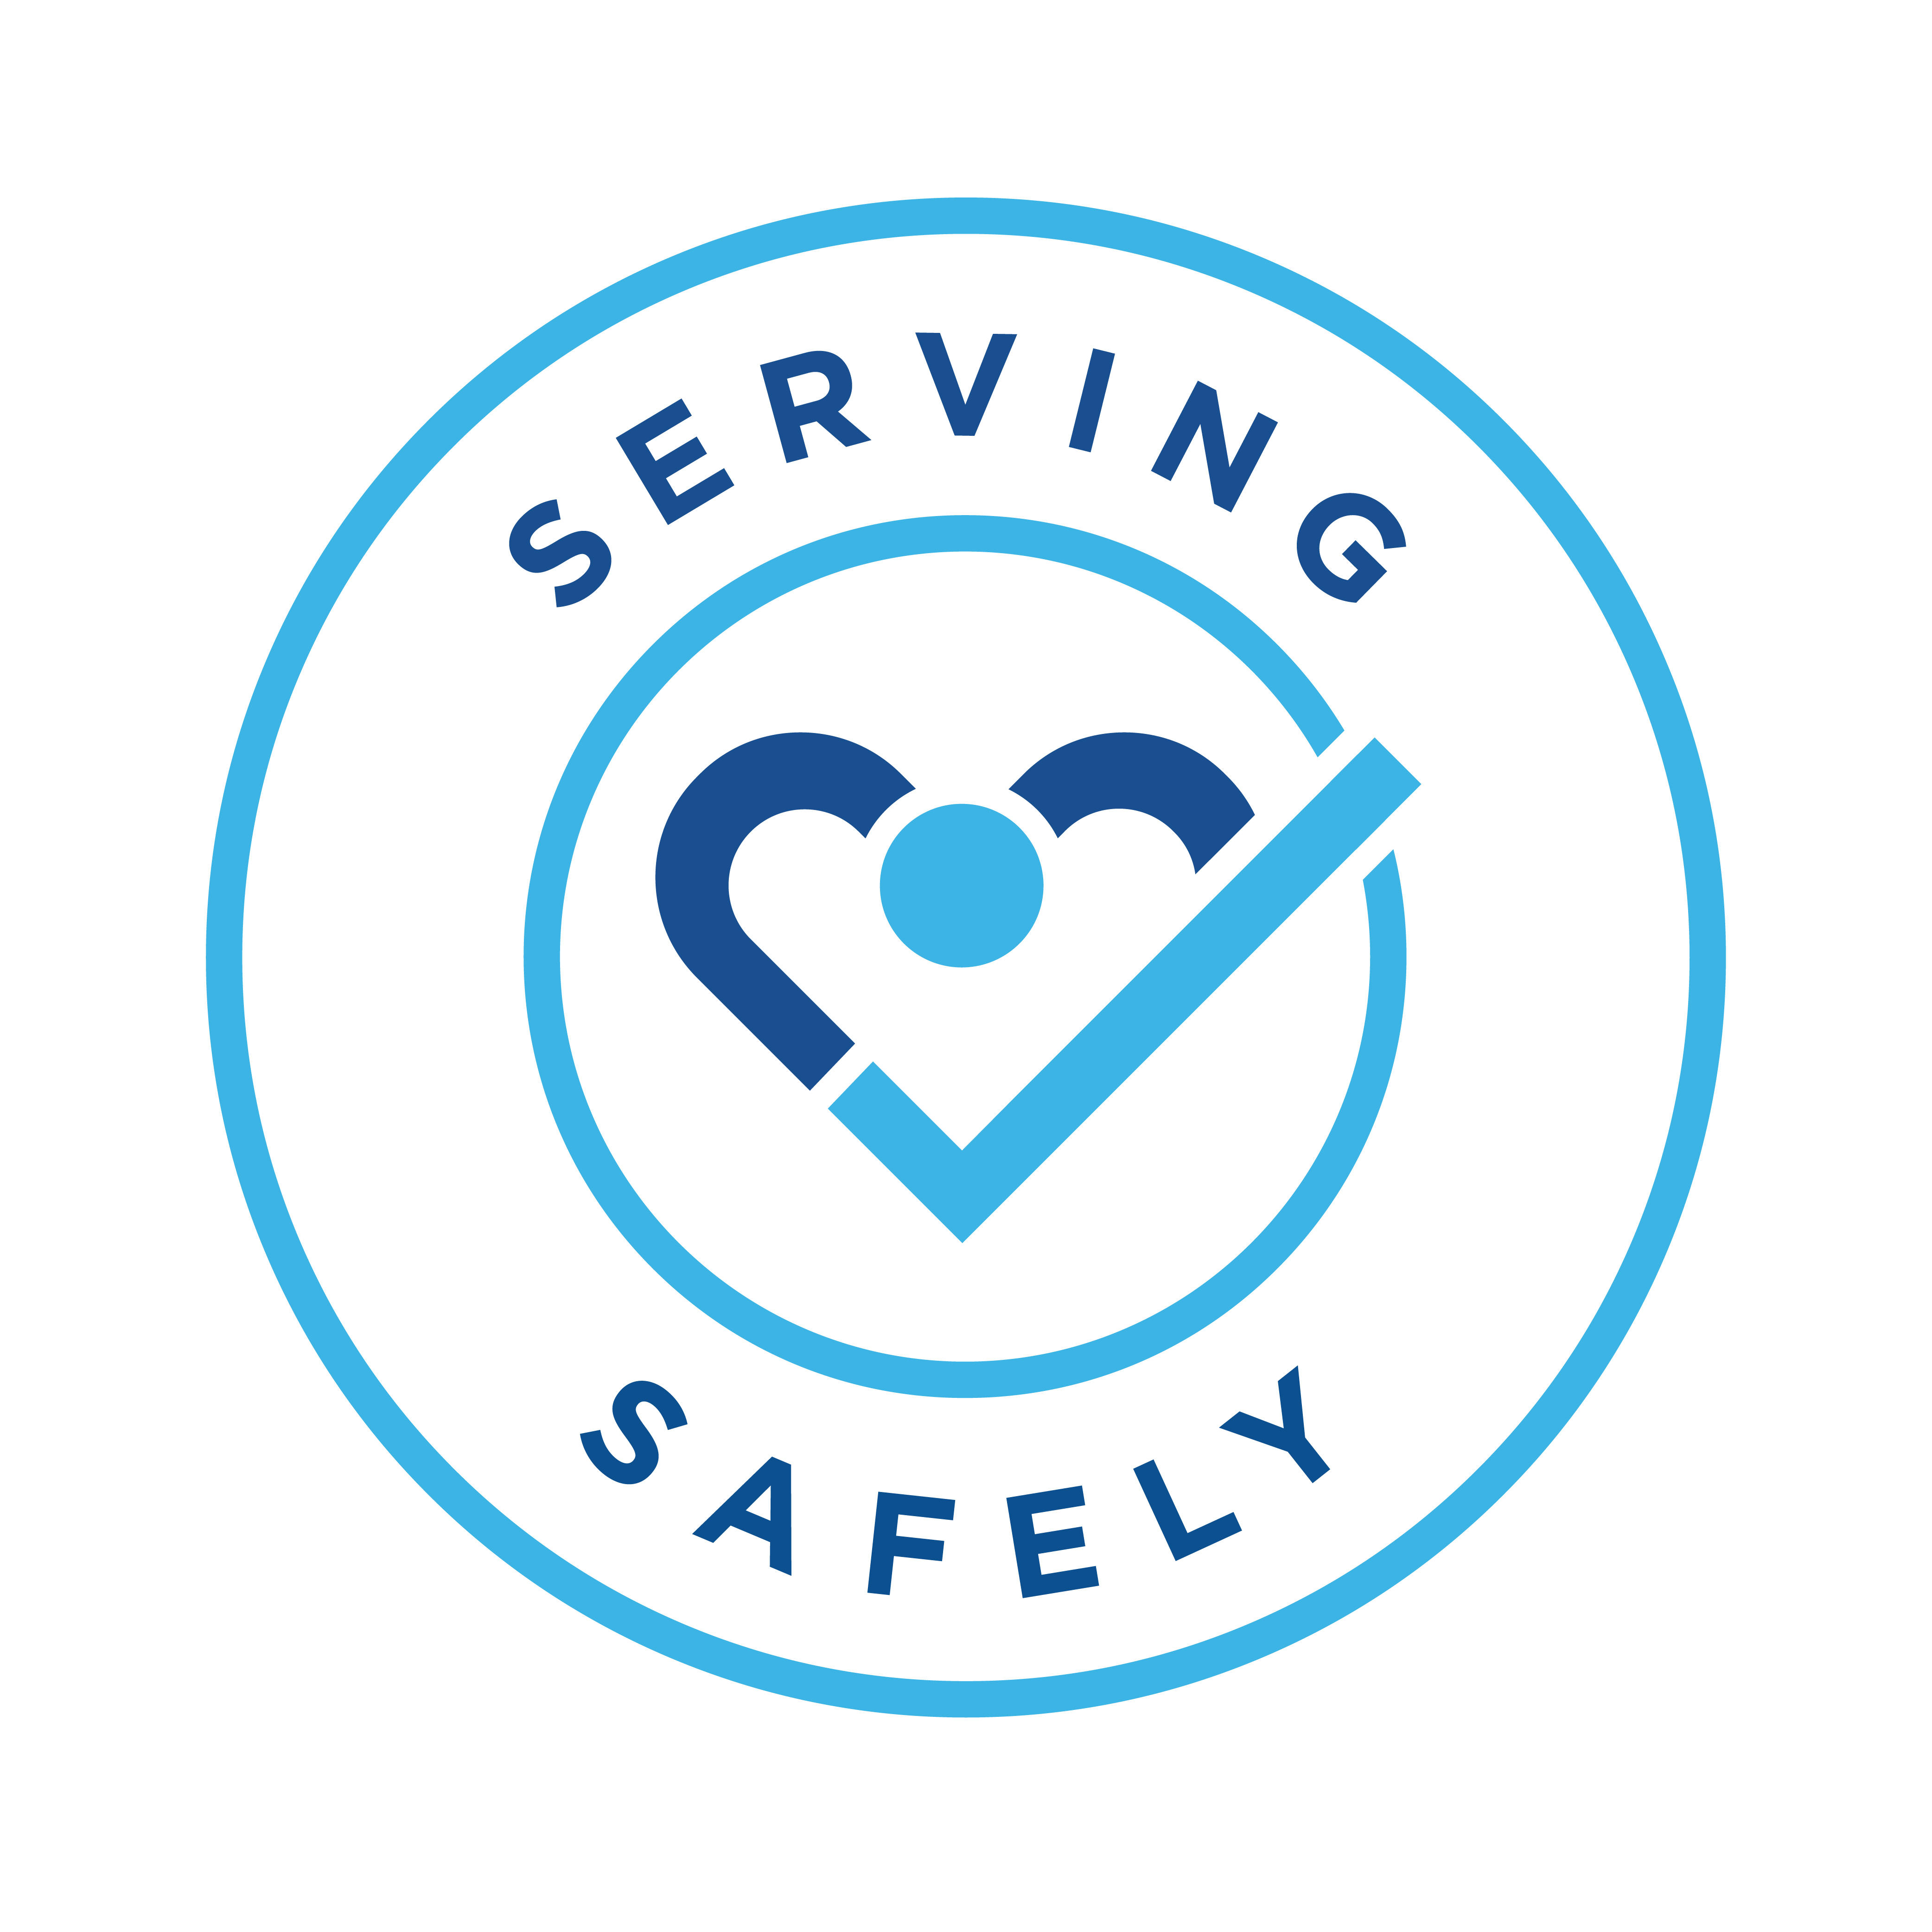 ErgoSanté in Gatineau: Nothing is more important to us than your health and safety. Our Serving Safely commitment means you can feel confident we're going above and beyond to put your safety first, no matter what.